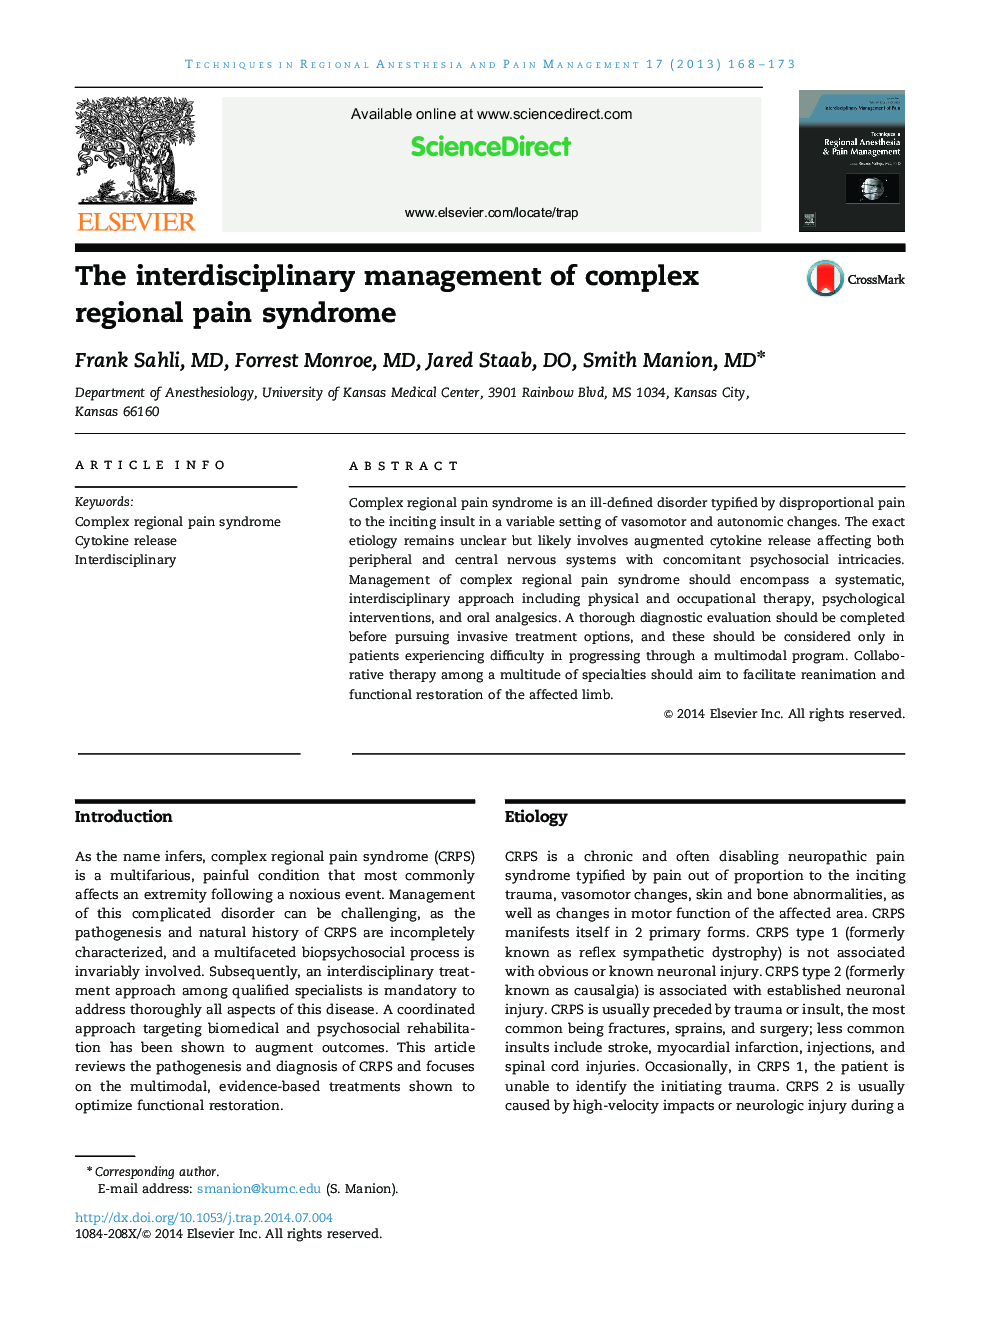 The interdisciplinary management of complex regional pain syndrome